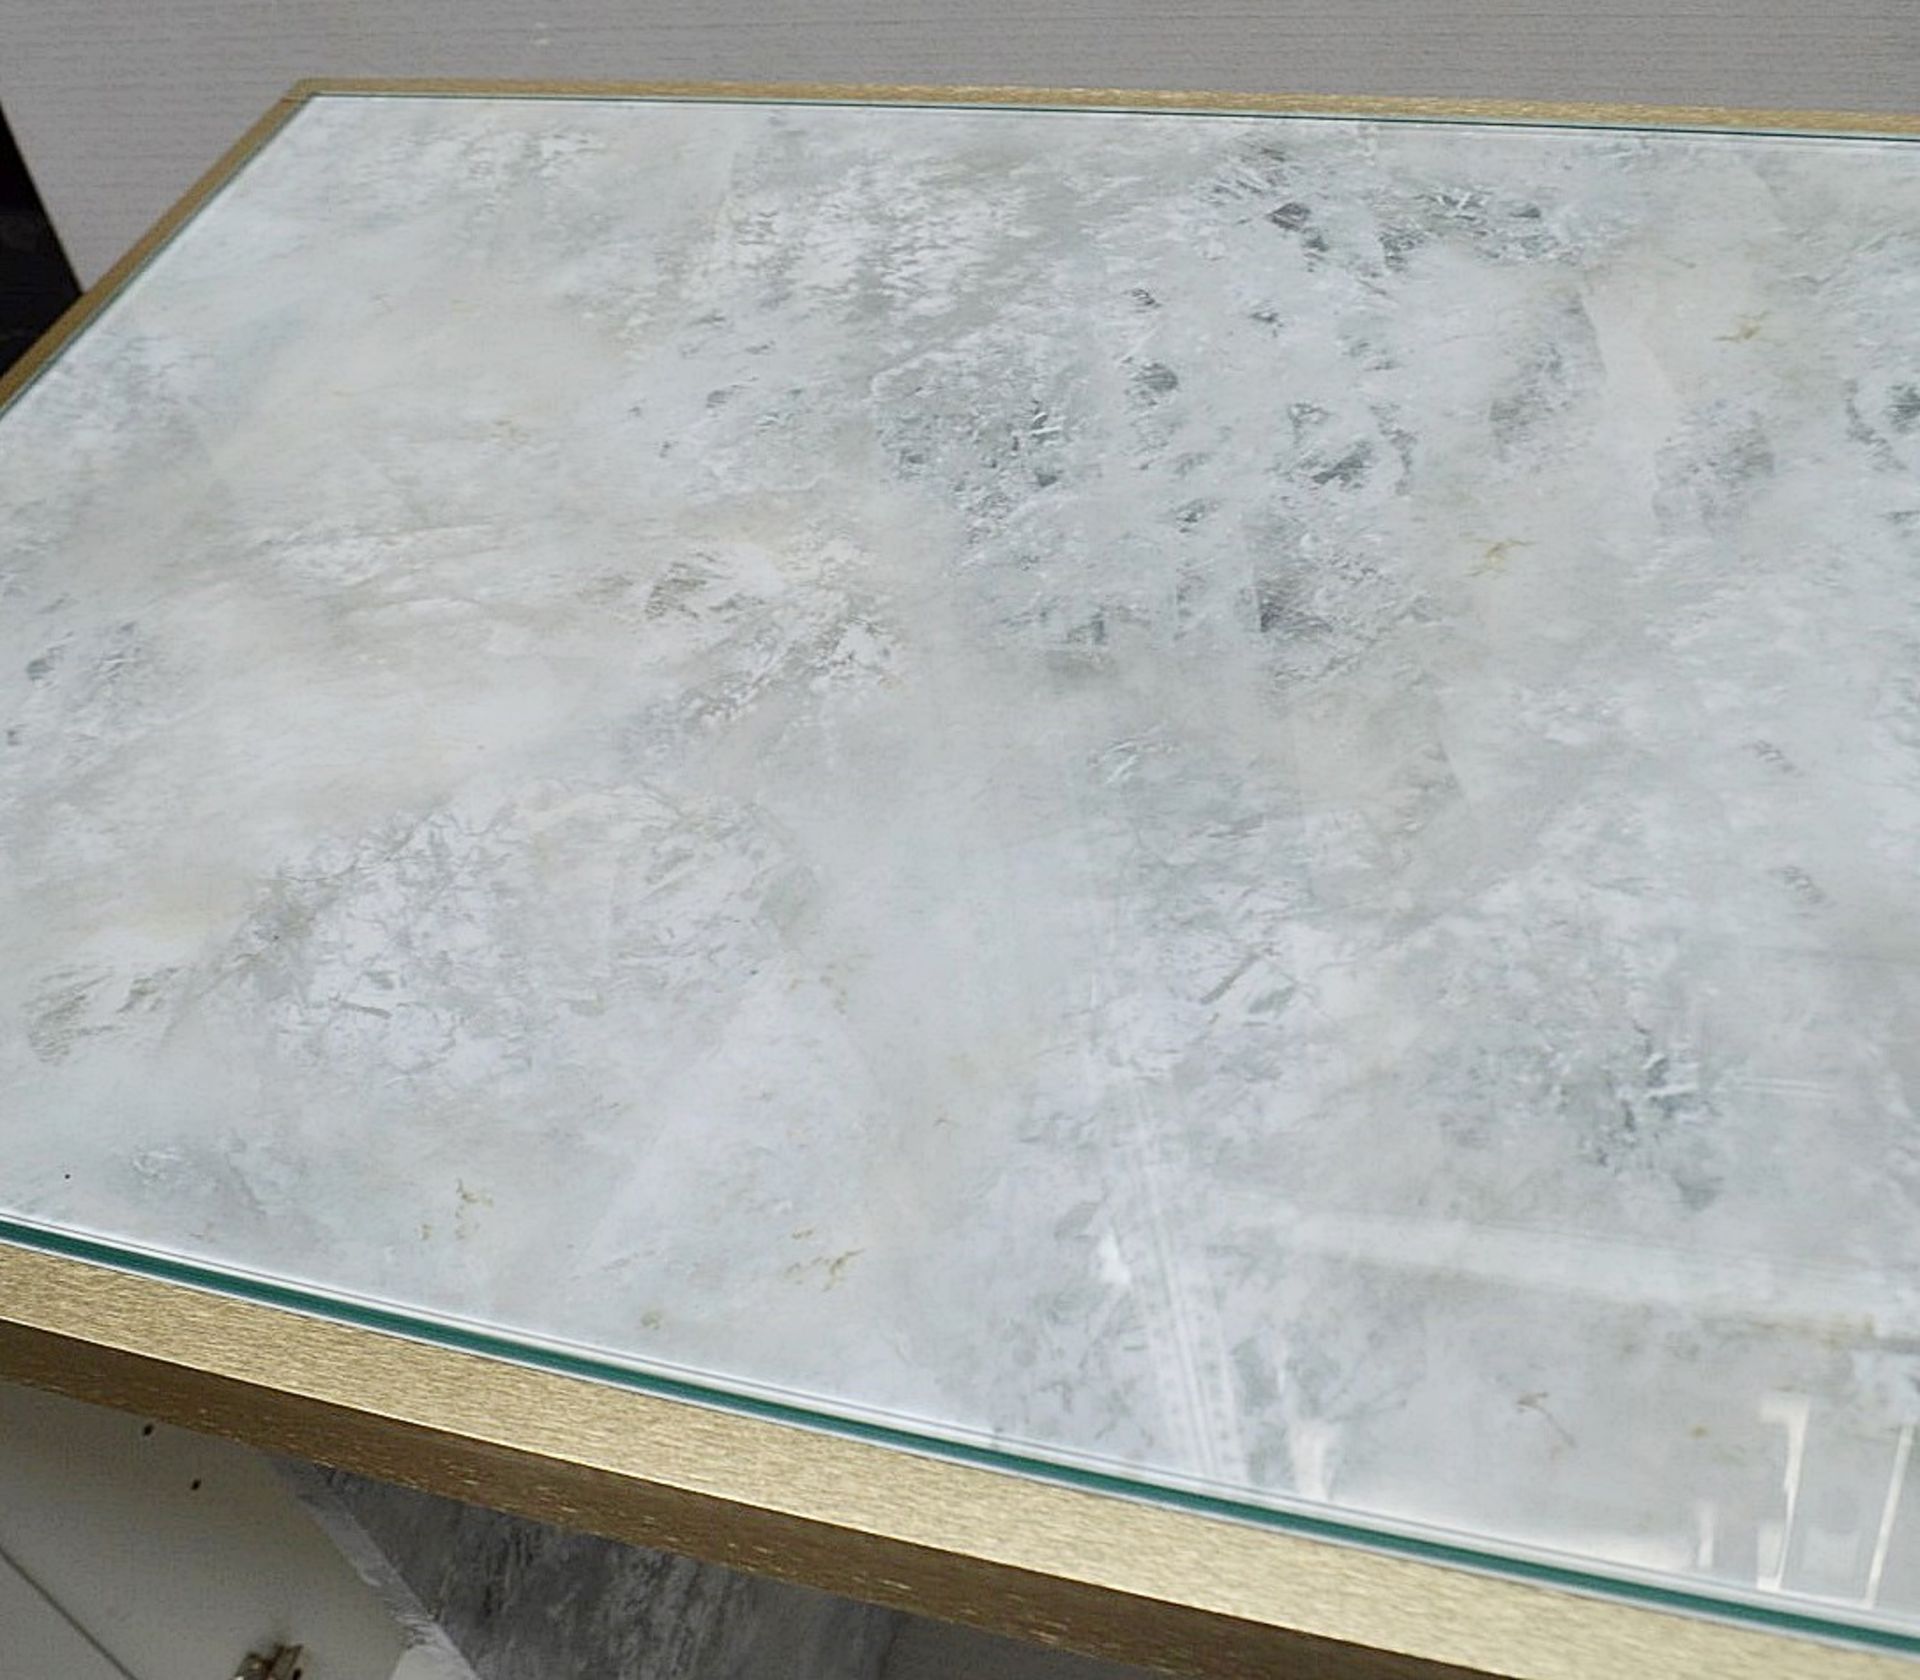 1 x BALDI Designer Retail Display Table / Desk Featuring A Marble Effect Aesthetic - Image 6 of 8